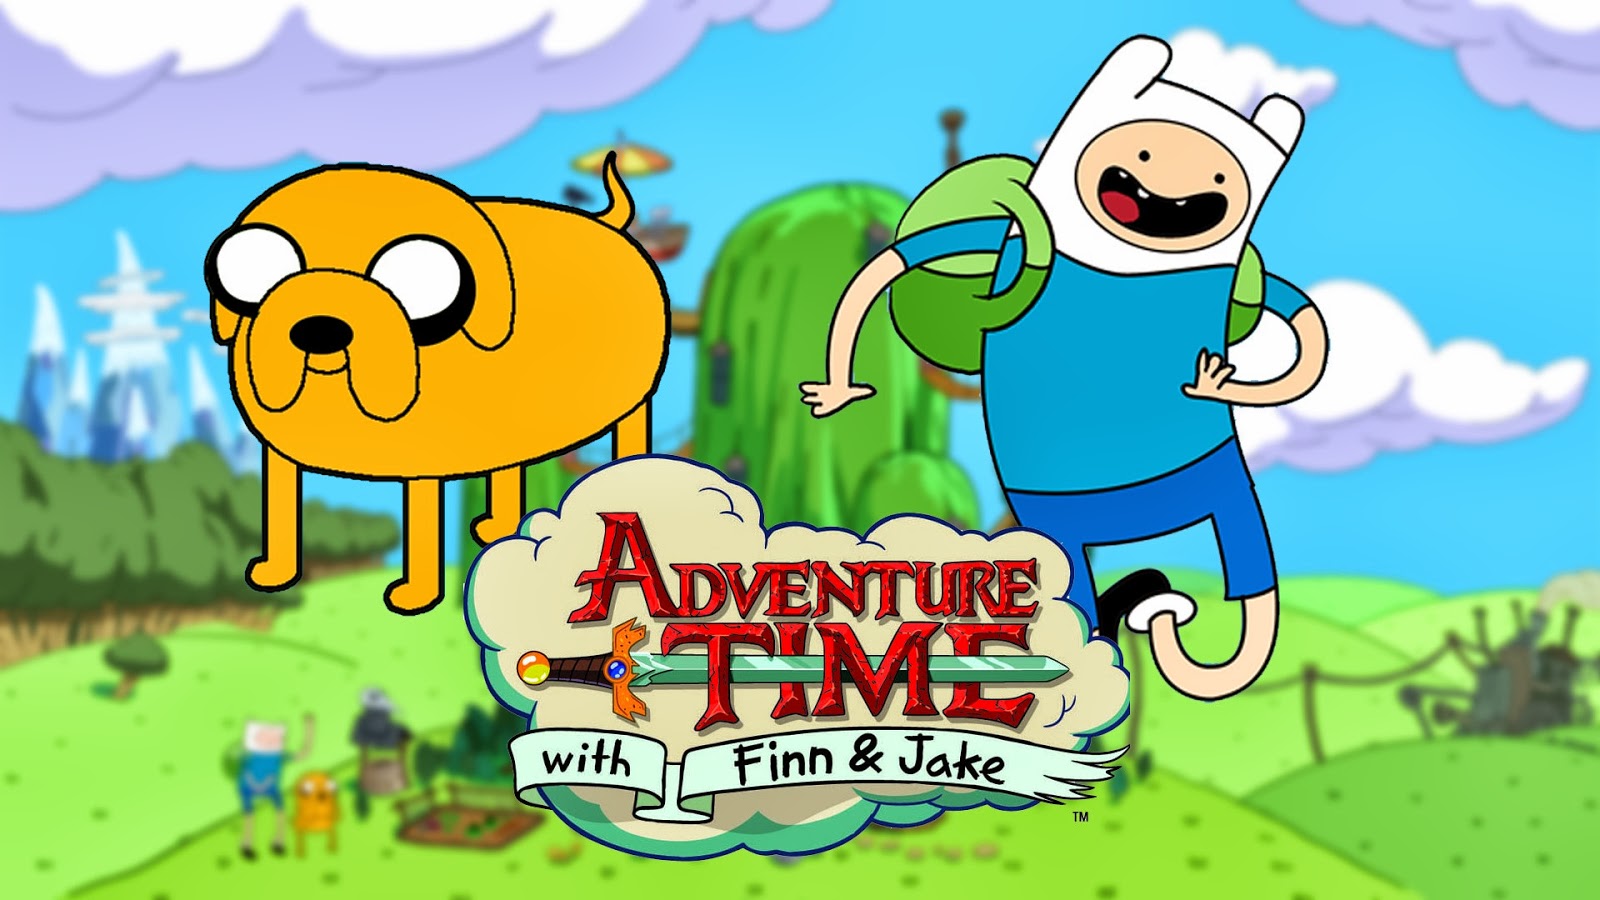 Adventure Time HD Wallpapers adventure time cartoons images